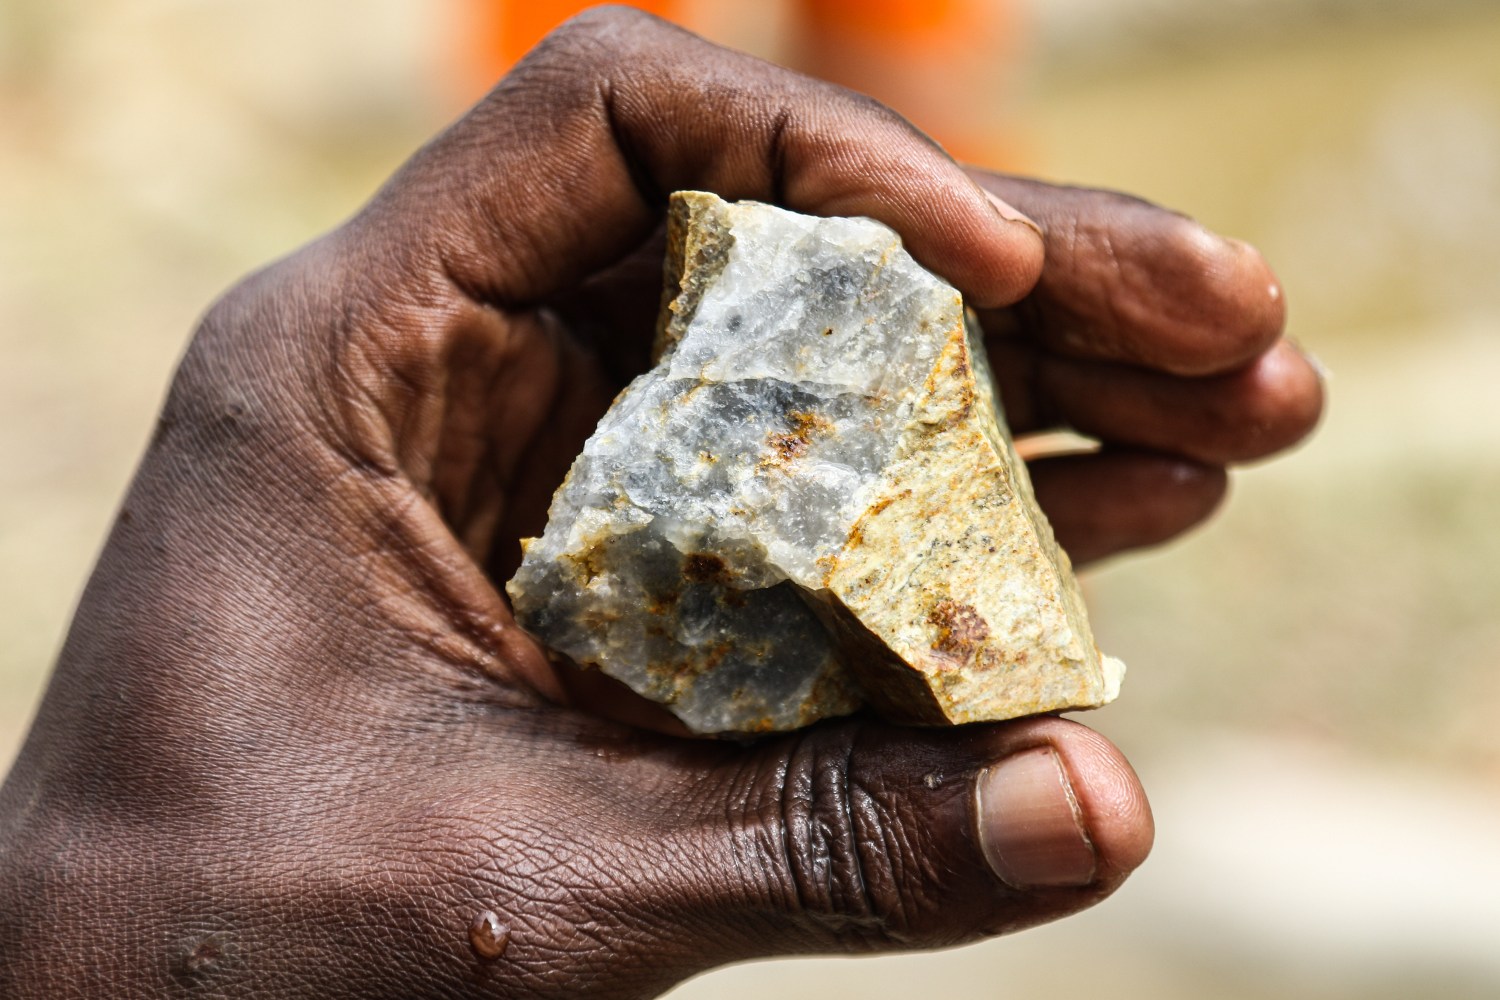 Is gold mining part of the solution to climate change?